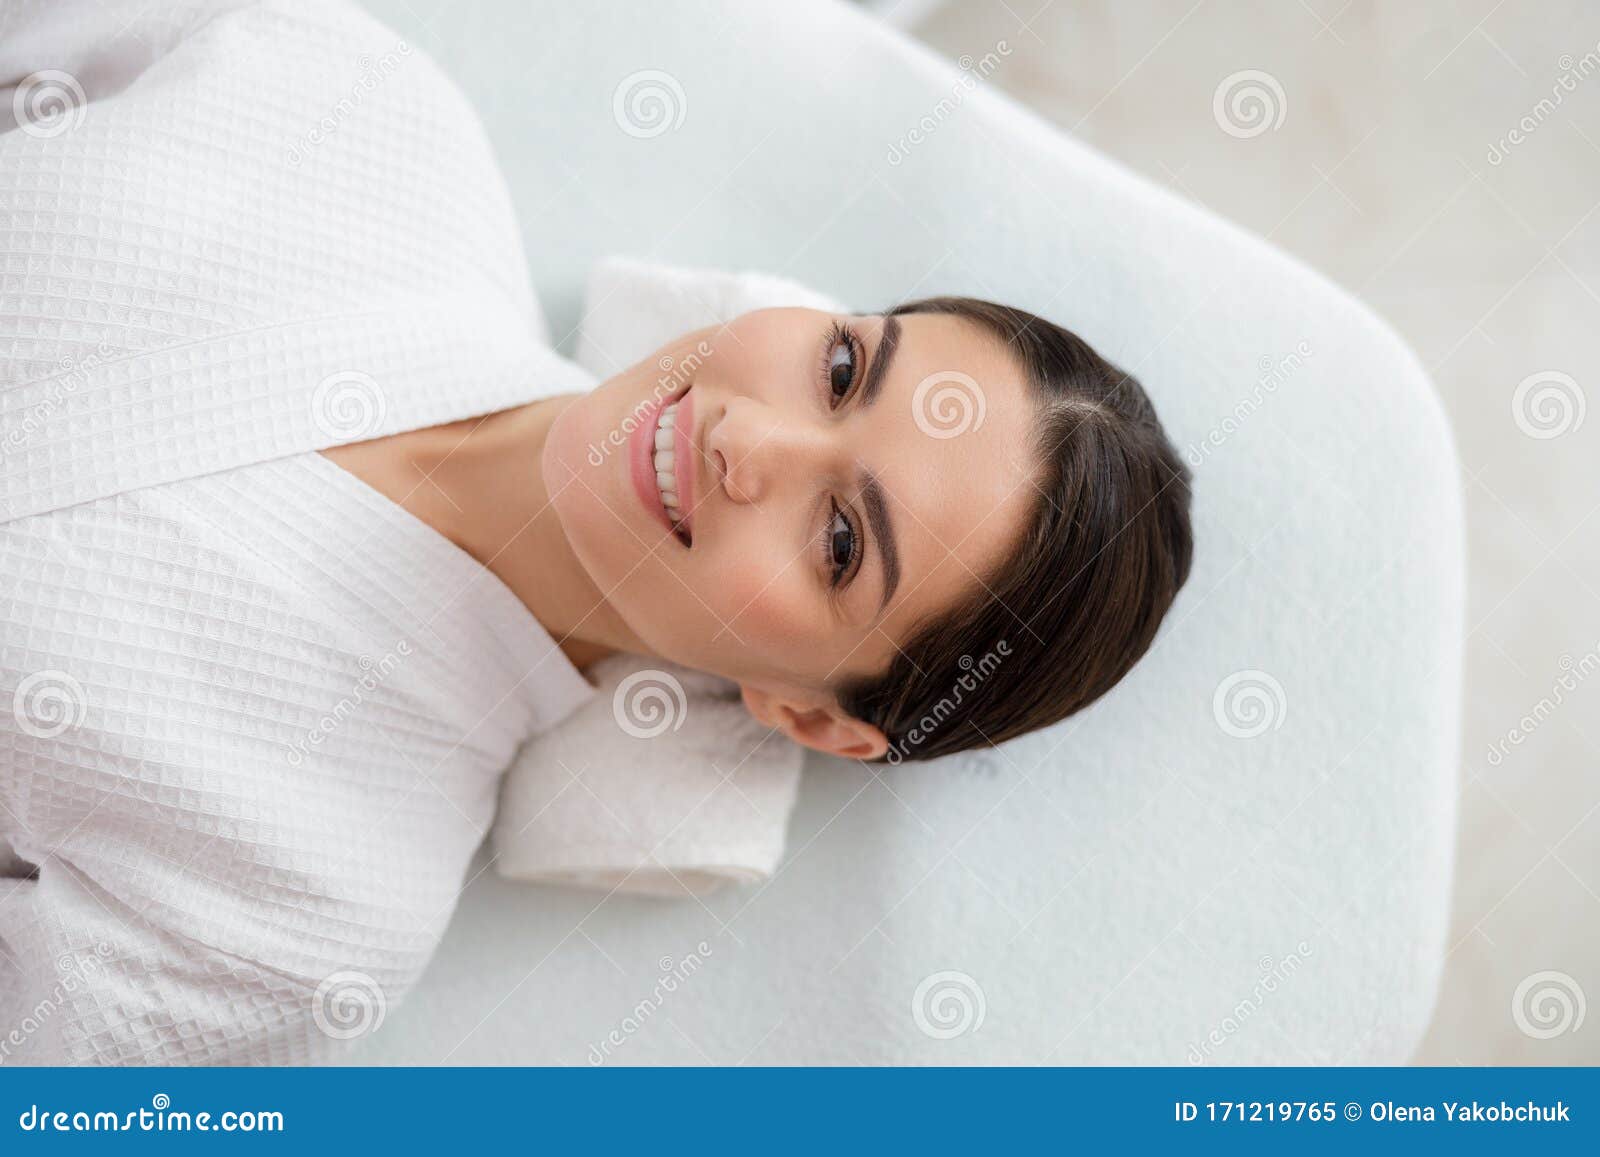 Cheerful Young Woman Lying On Daybed At Beauty Salon Stock Image